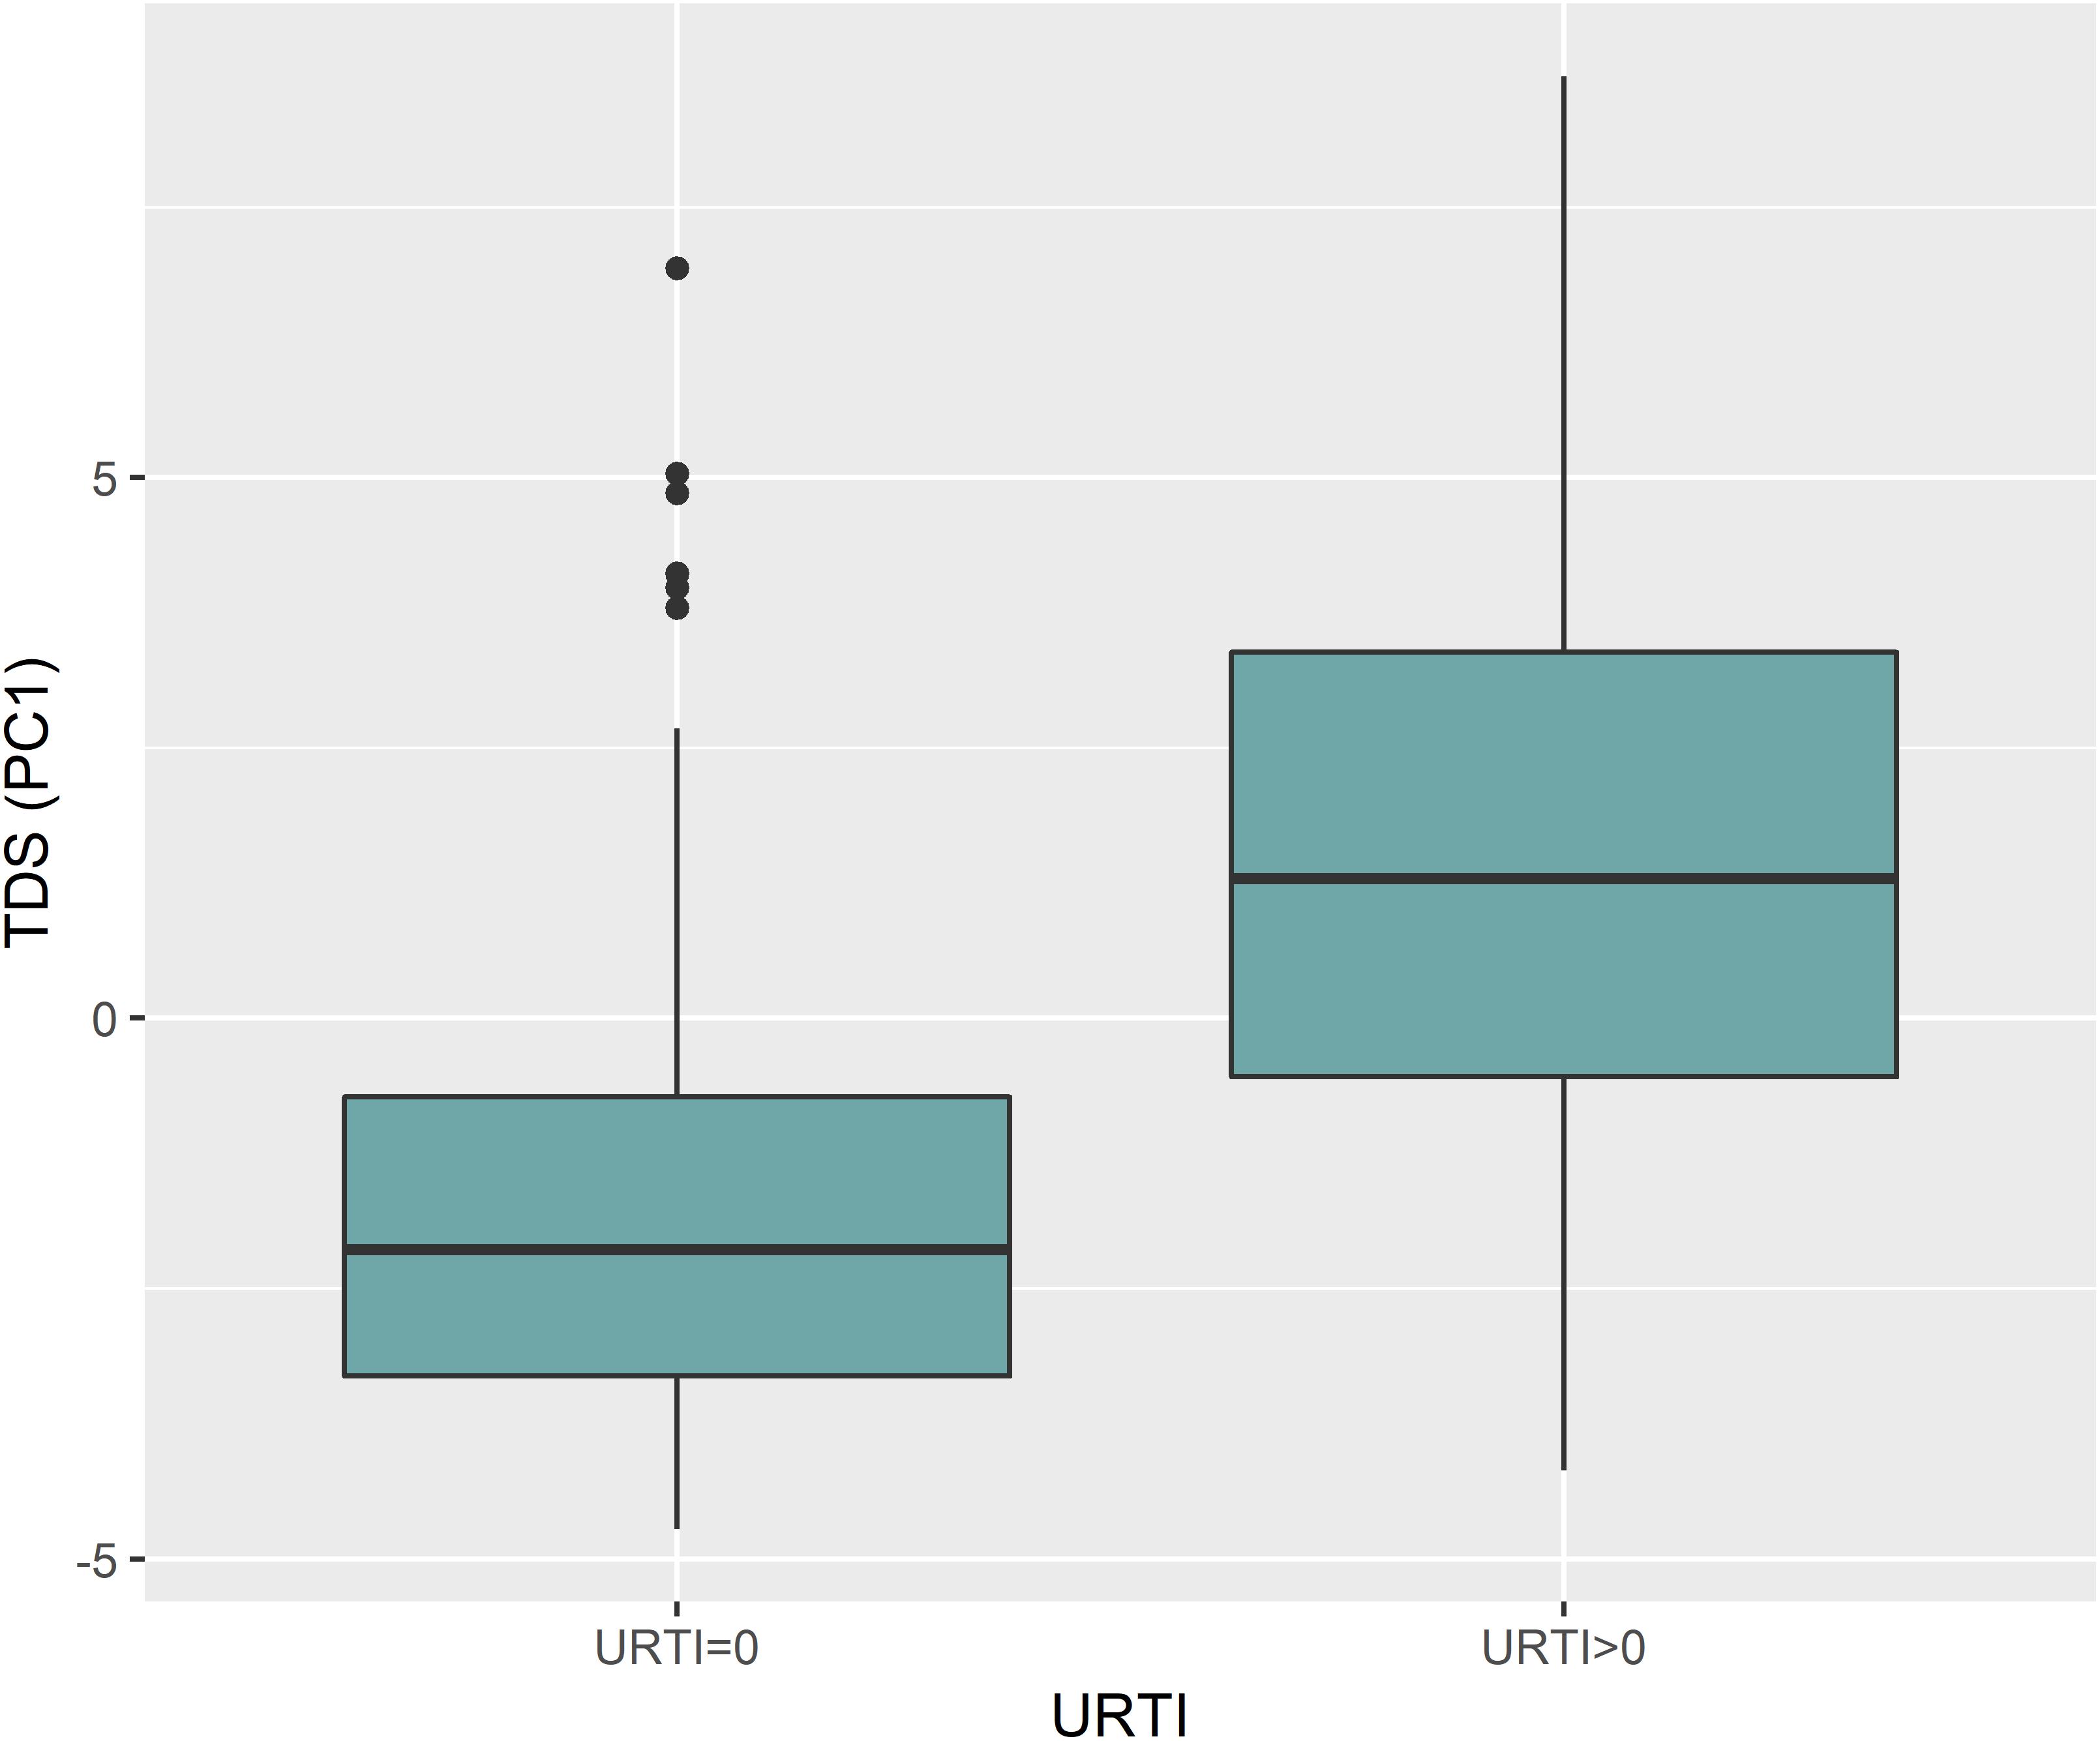 Box & whisker plots of IGF-1 values by type of sport. Pre-game and